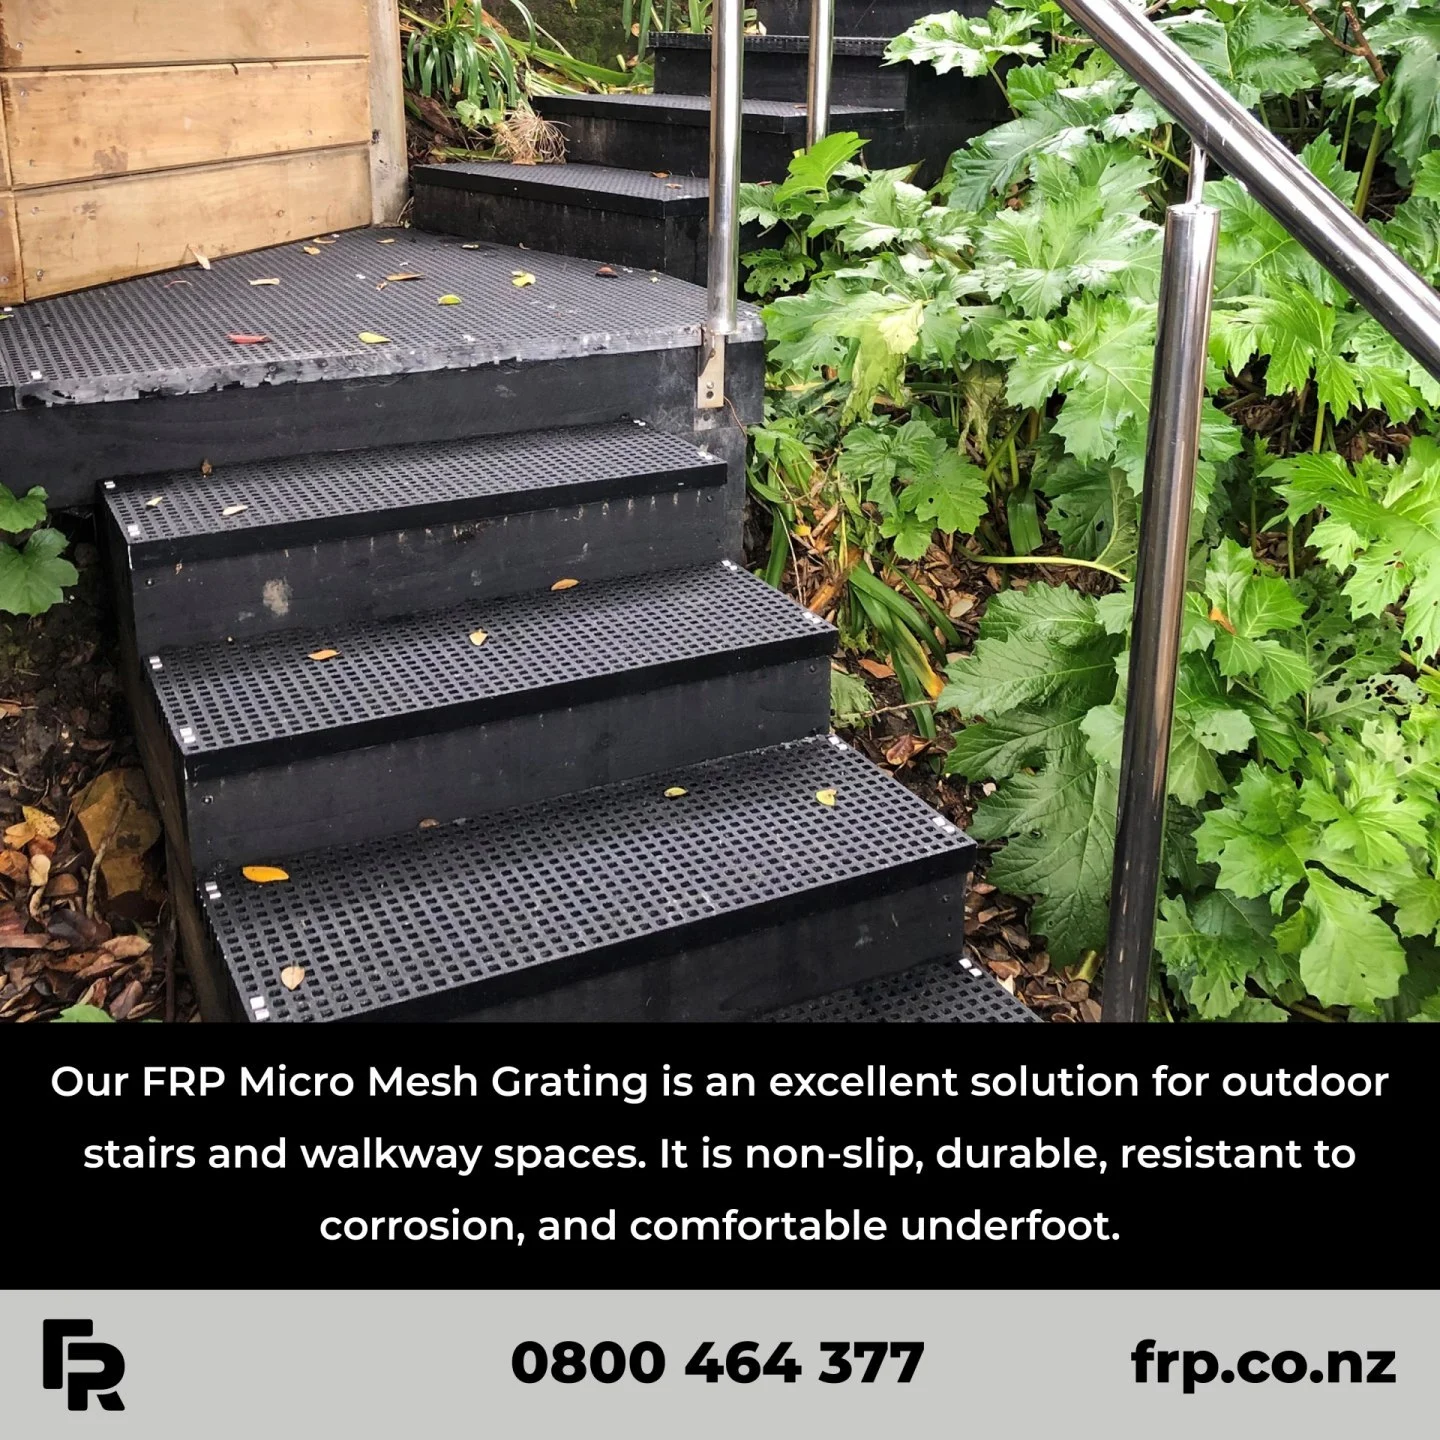 We are here to help!

#frp #frpproducts #outdoorstairs #walkways #residential #landscaping #commercial #nzarchitects